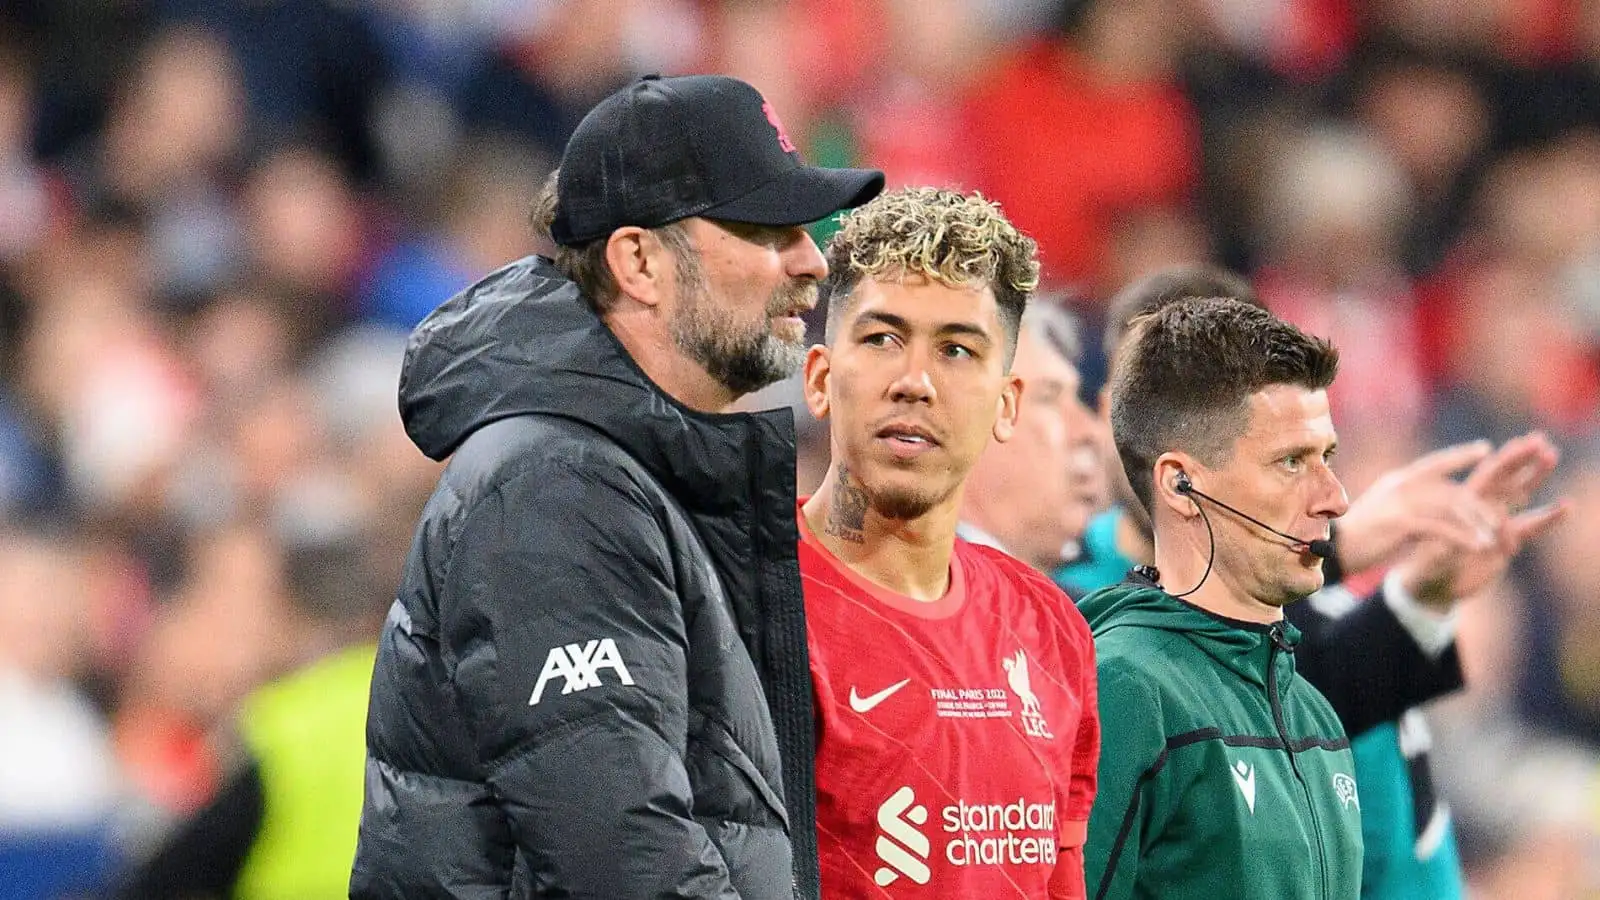 Roberto Firmino with Jurgen Klopp during Liverpool's UCL final against Real Madrid in Paris